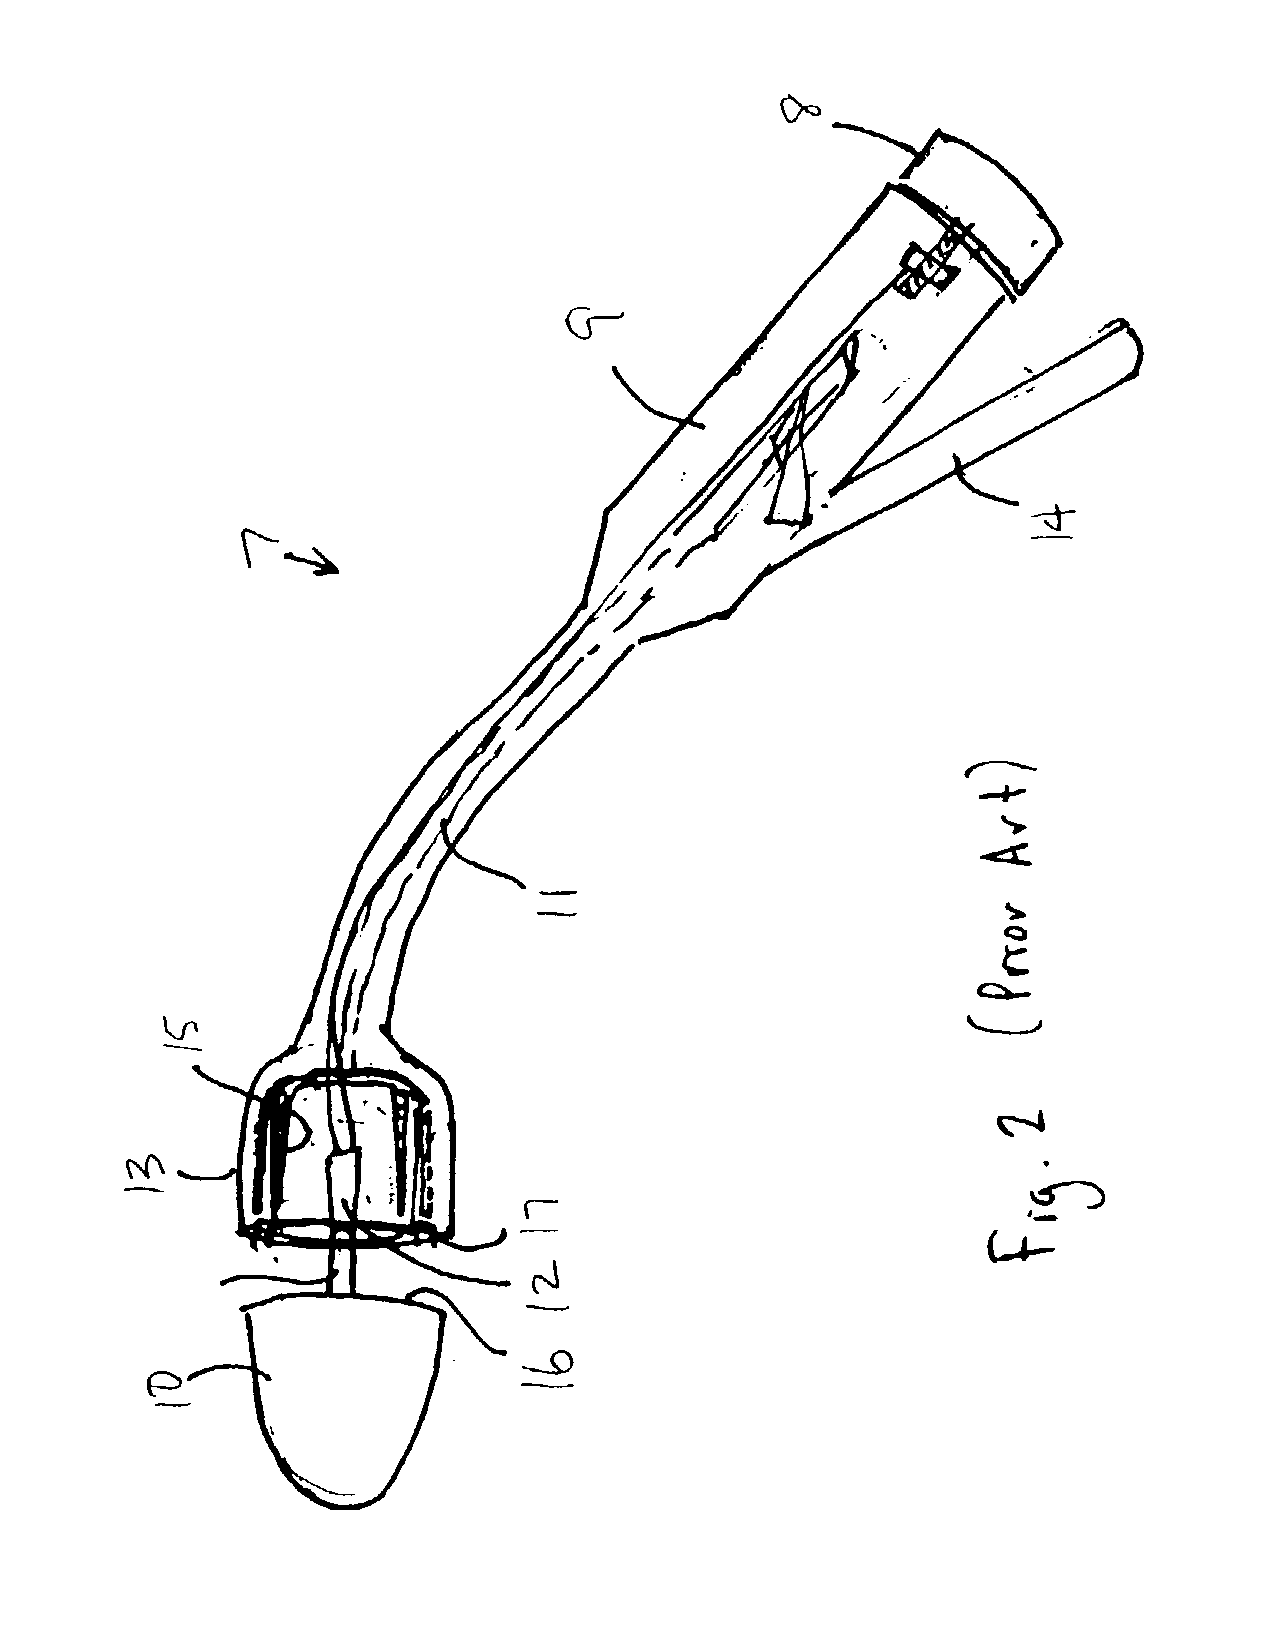 Fluid delivery mechanism for use with anastomosing, stapling, and resecting instruments